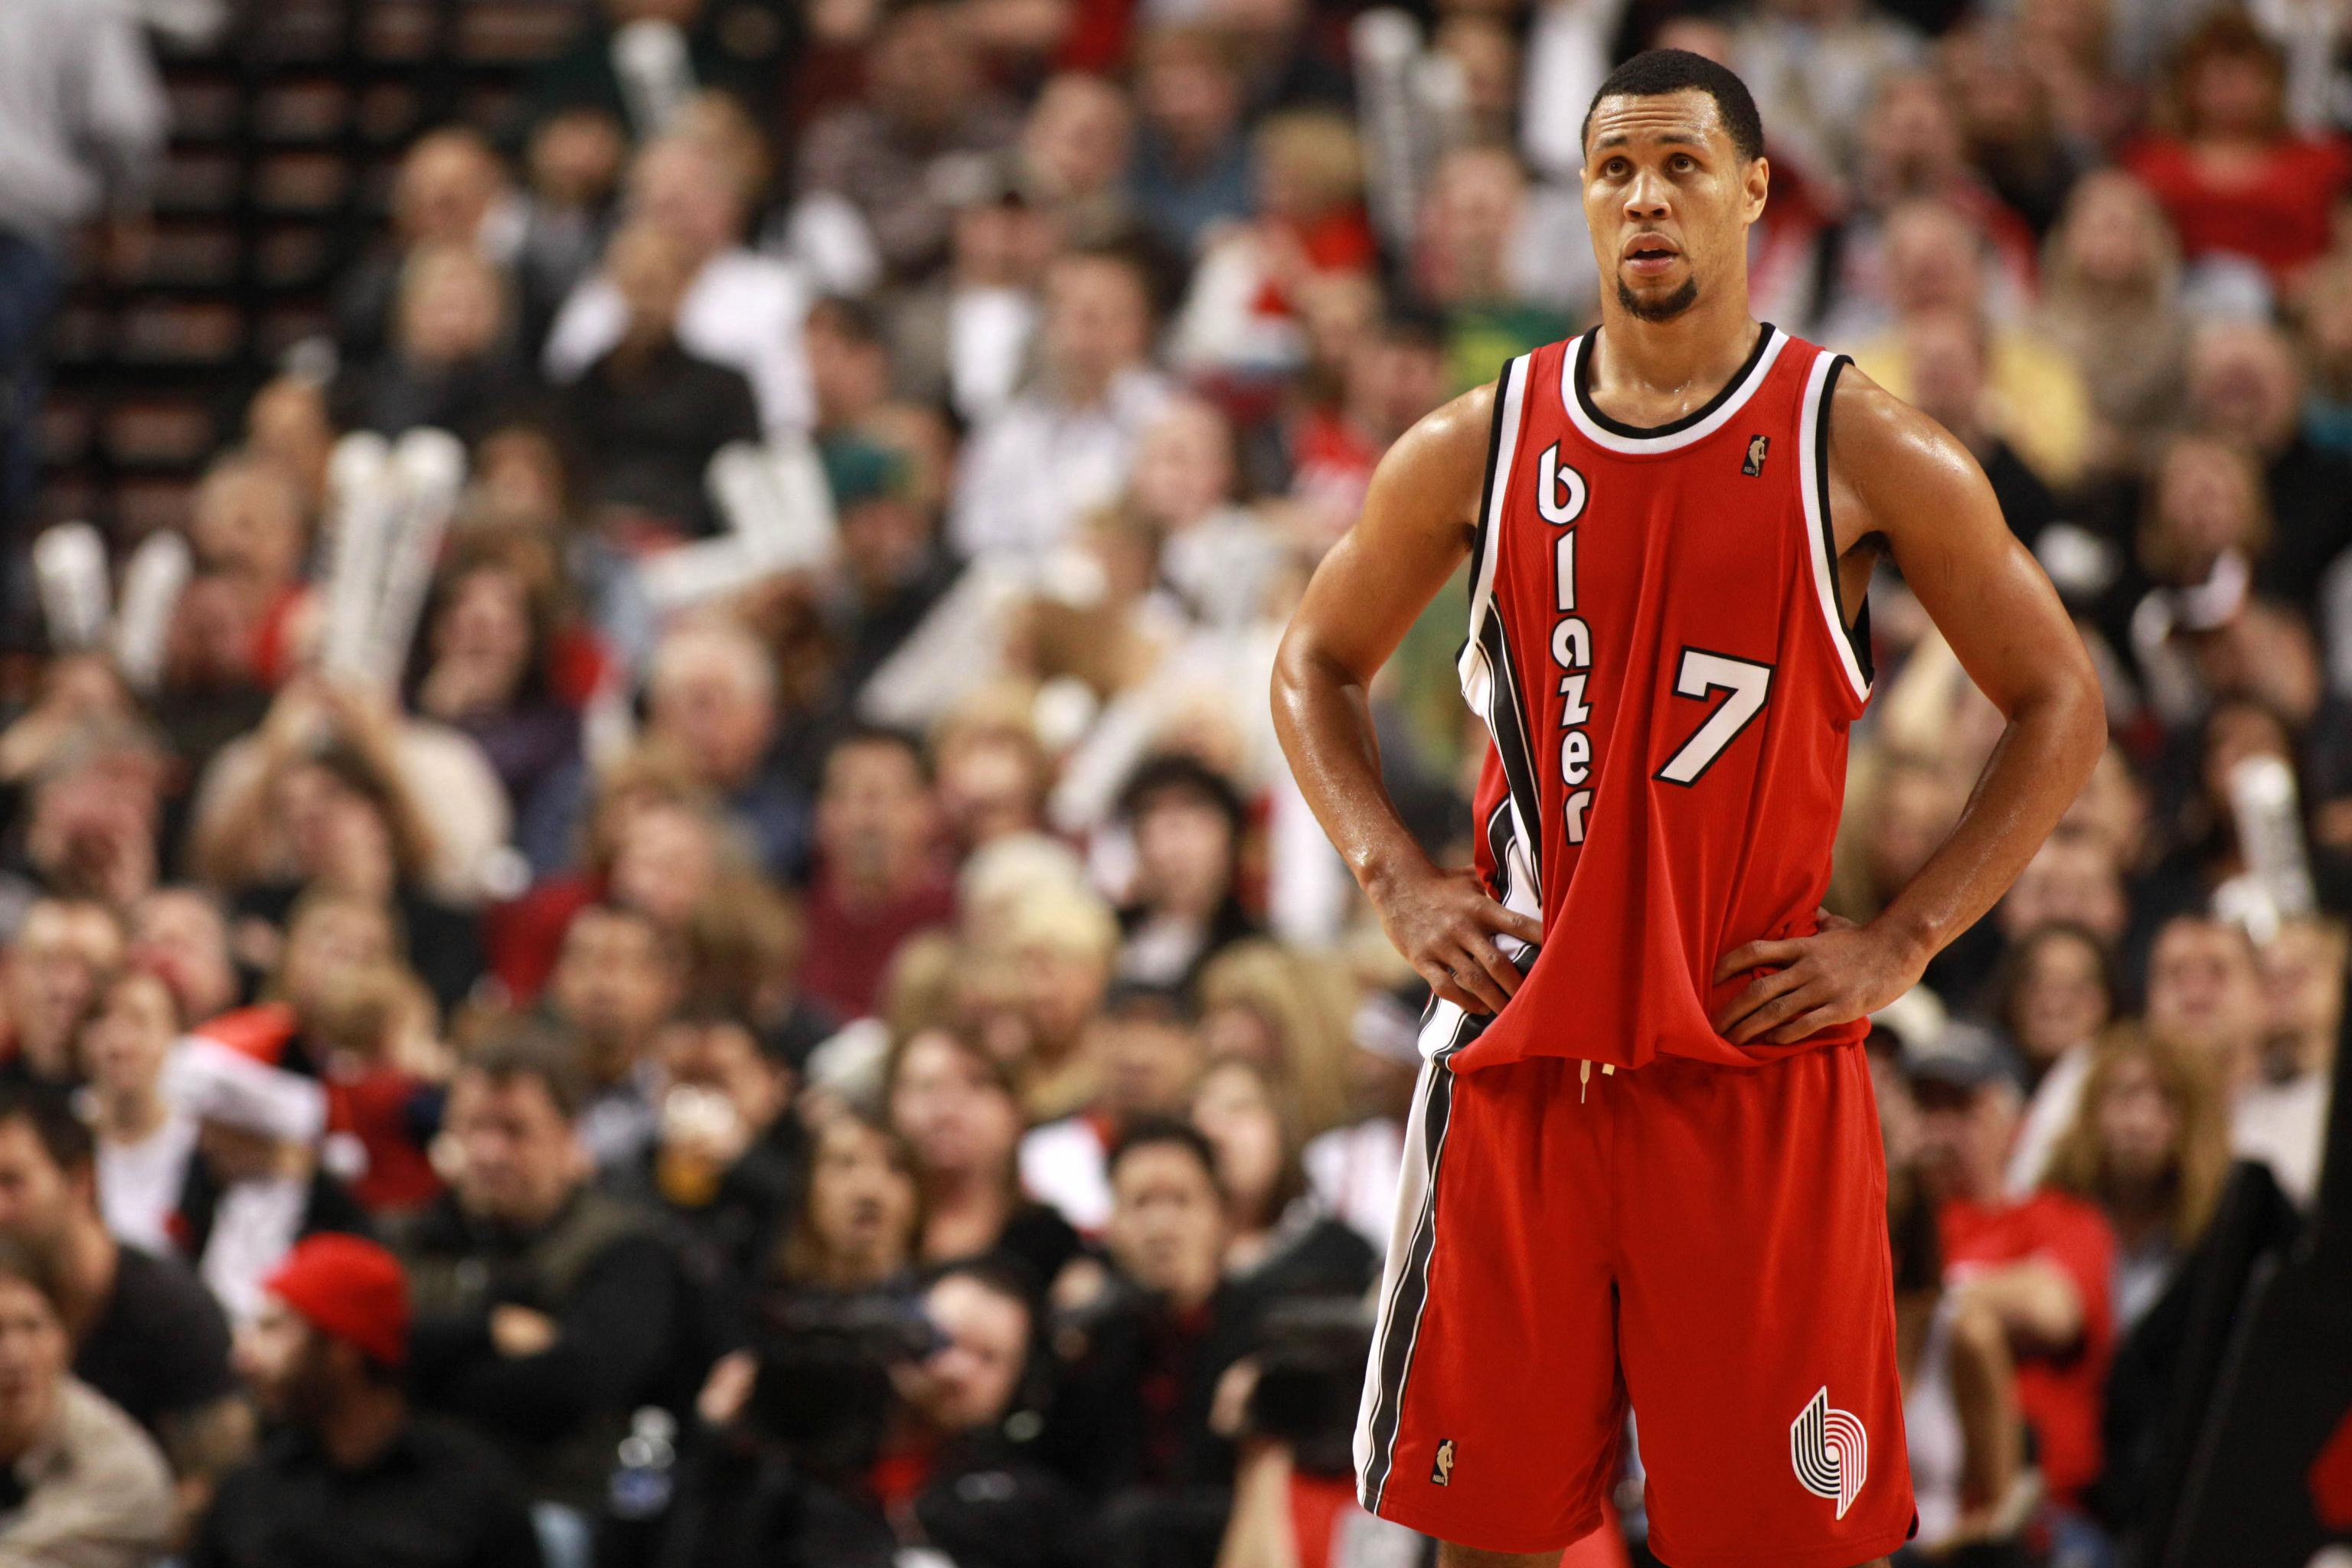 Reports: Brandon Roy agrees to 2-year contract with Timberwolves 